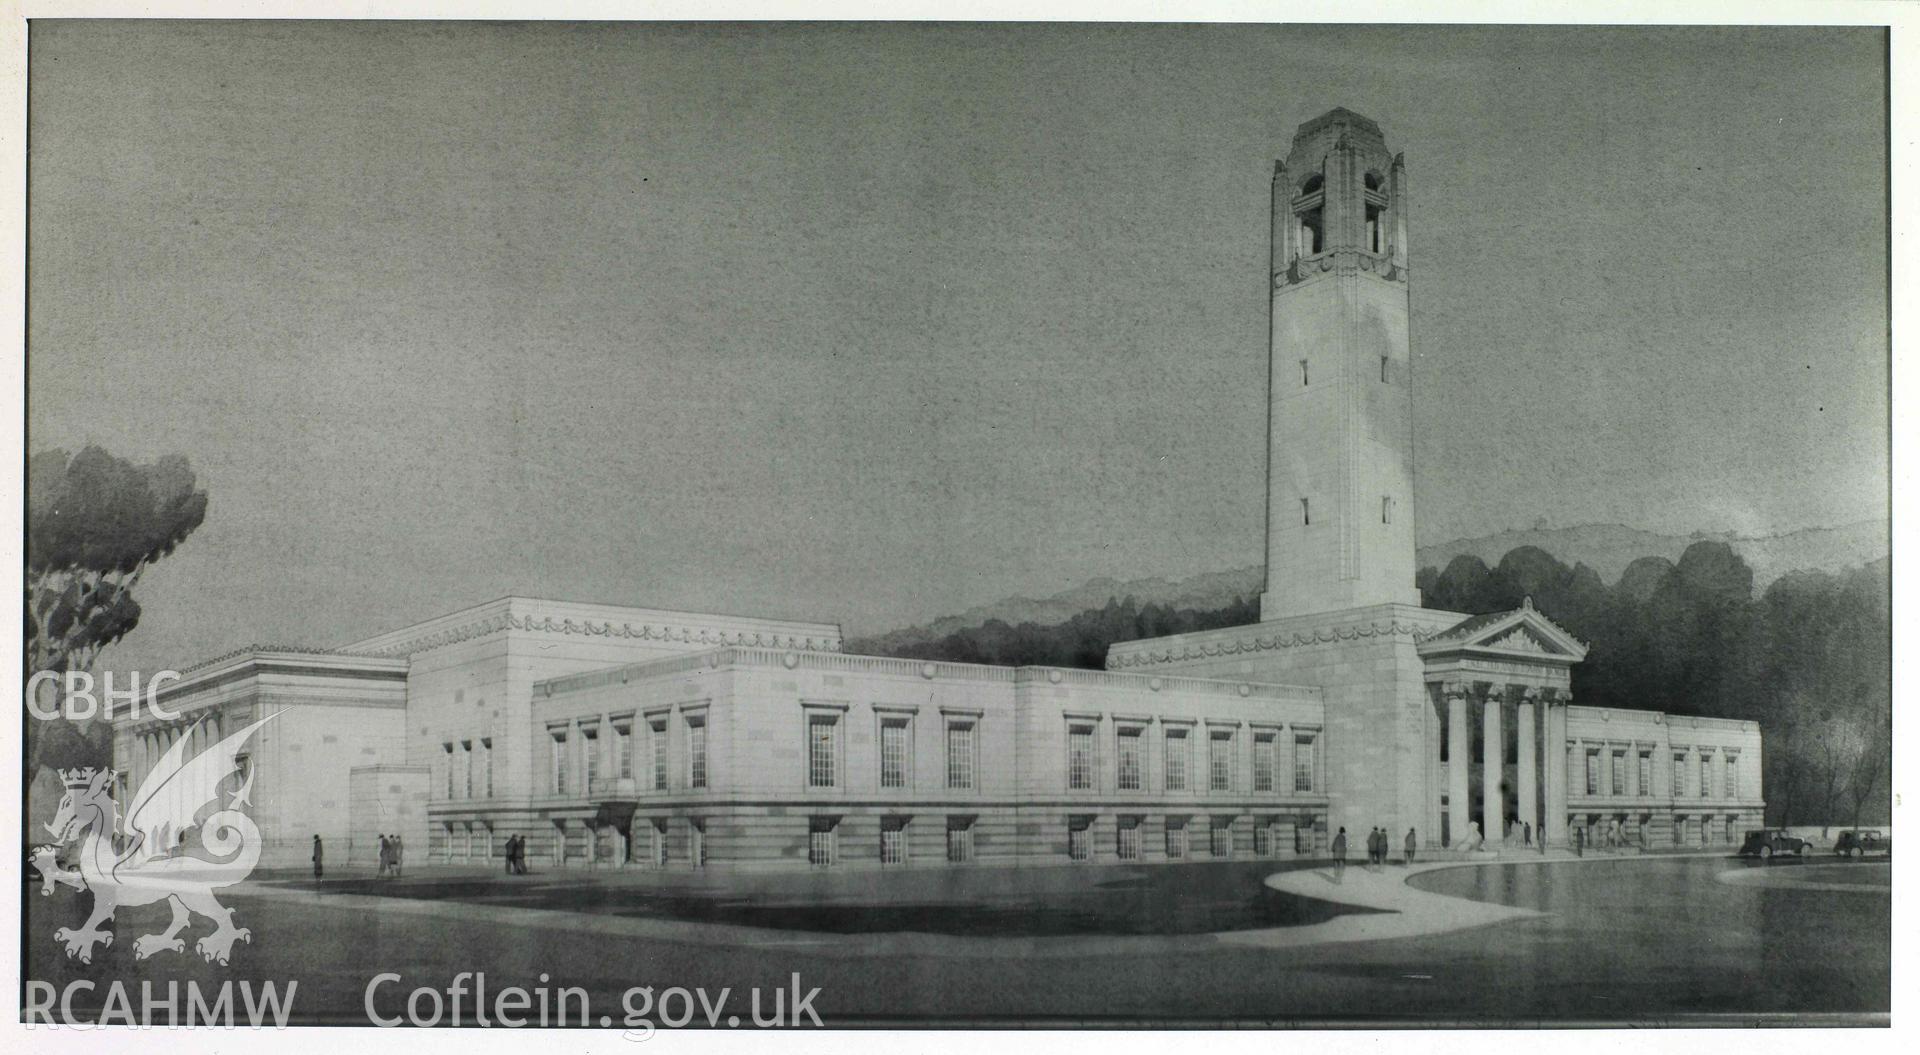 Digital copy of a loose photo in front of album 'Photographs of Work by Percy Thomas. Vol. 1: Swansea Civic Centre’ of Swansea Guildhall exterior from main frontage with tower by Stewart Bale. Undated.